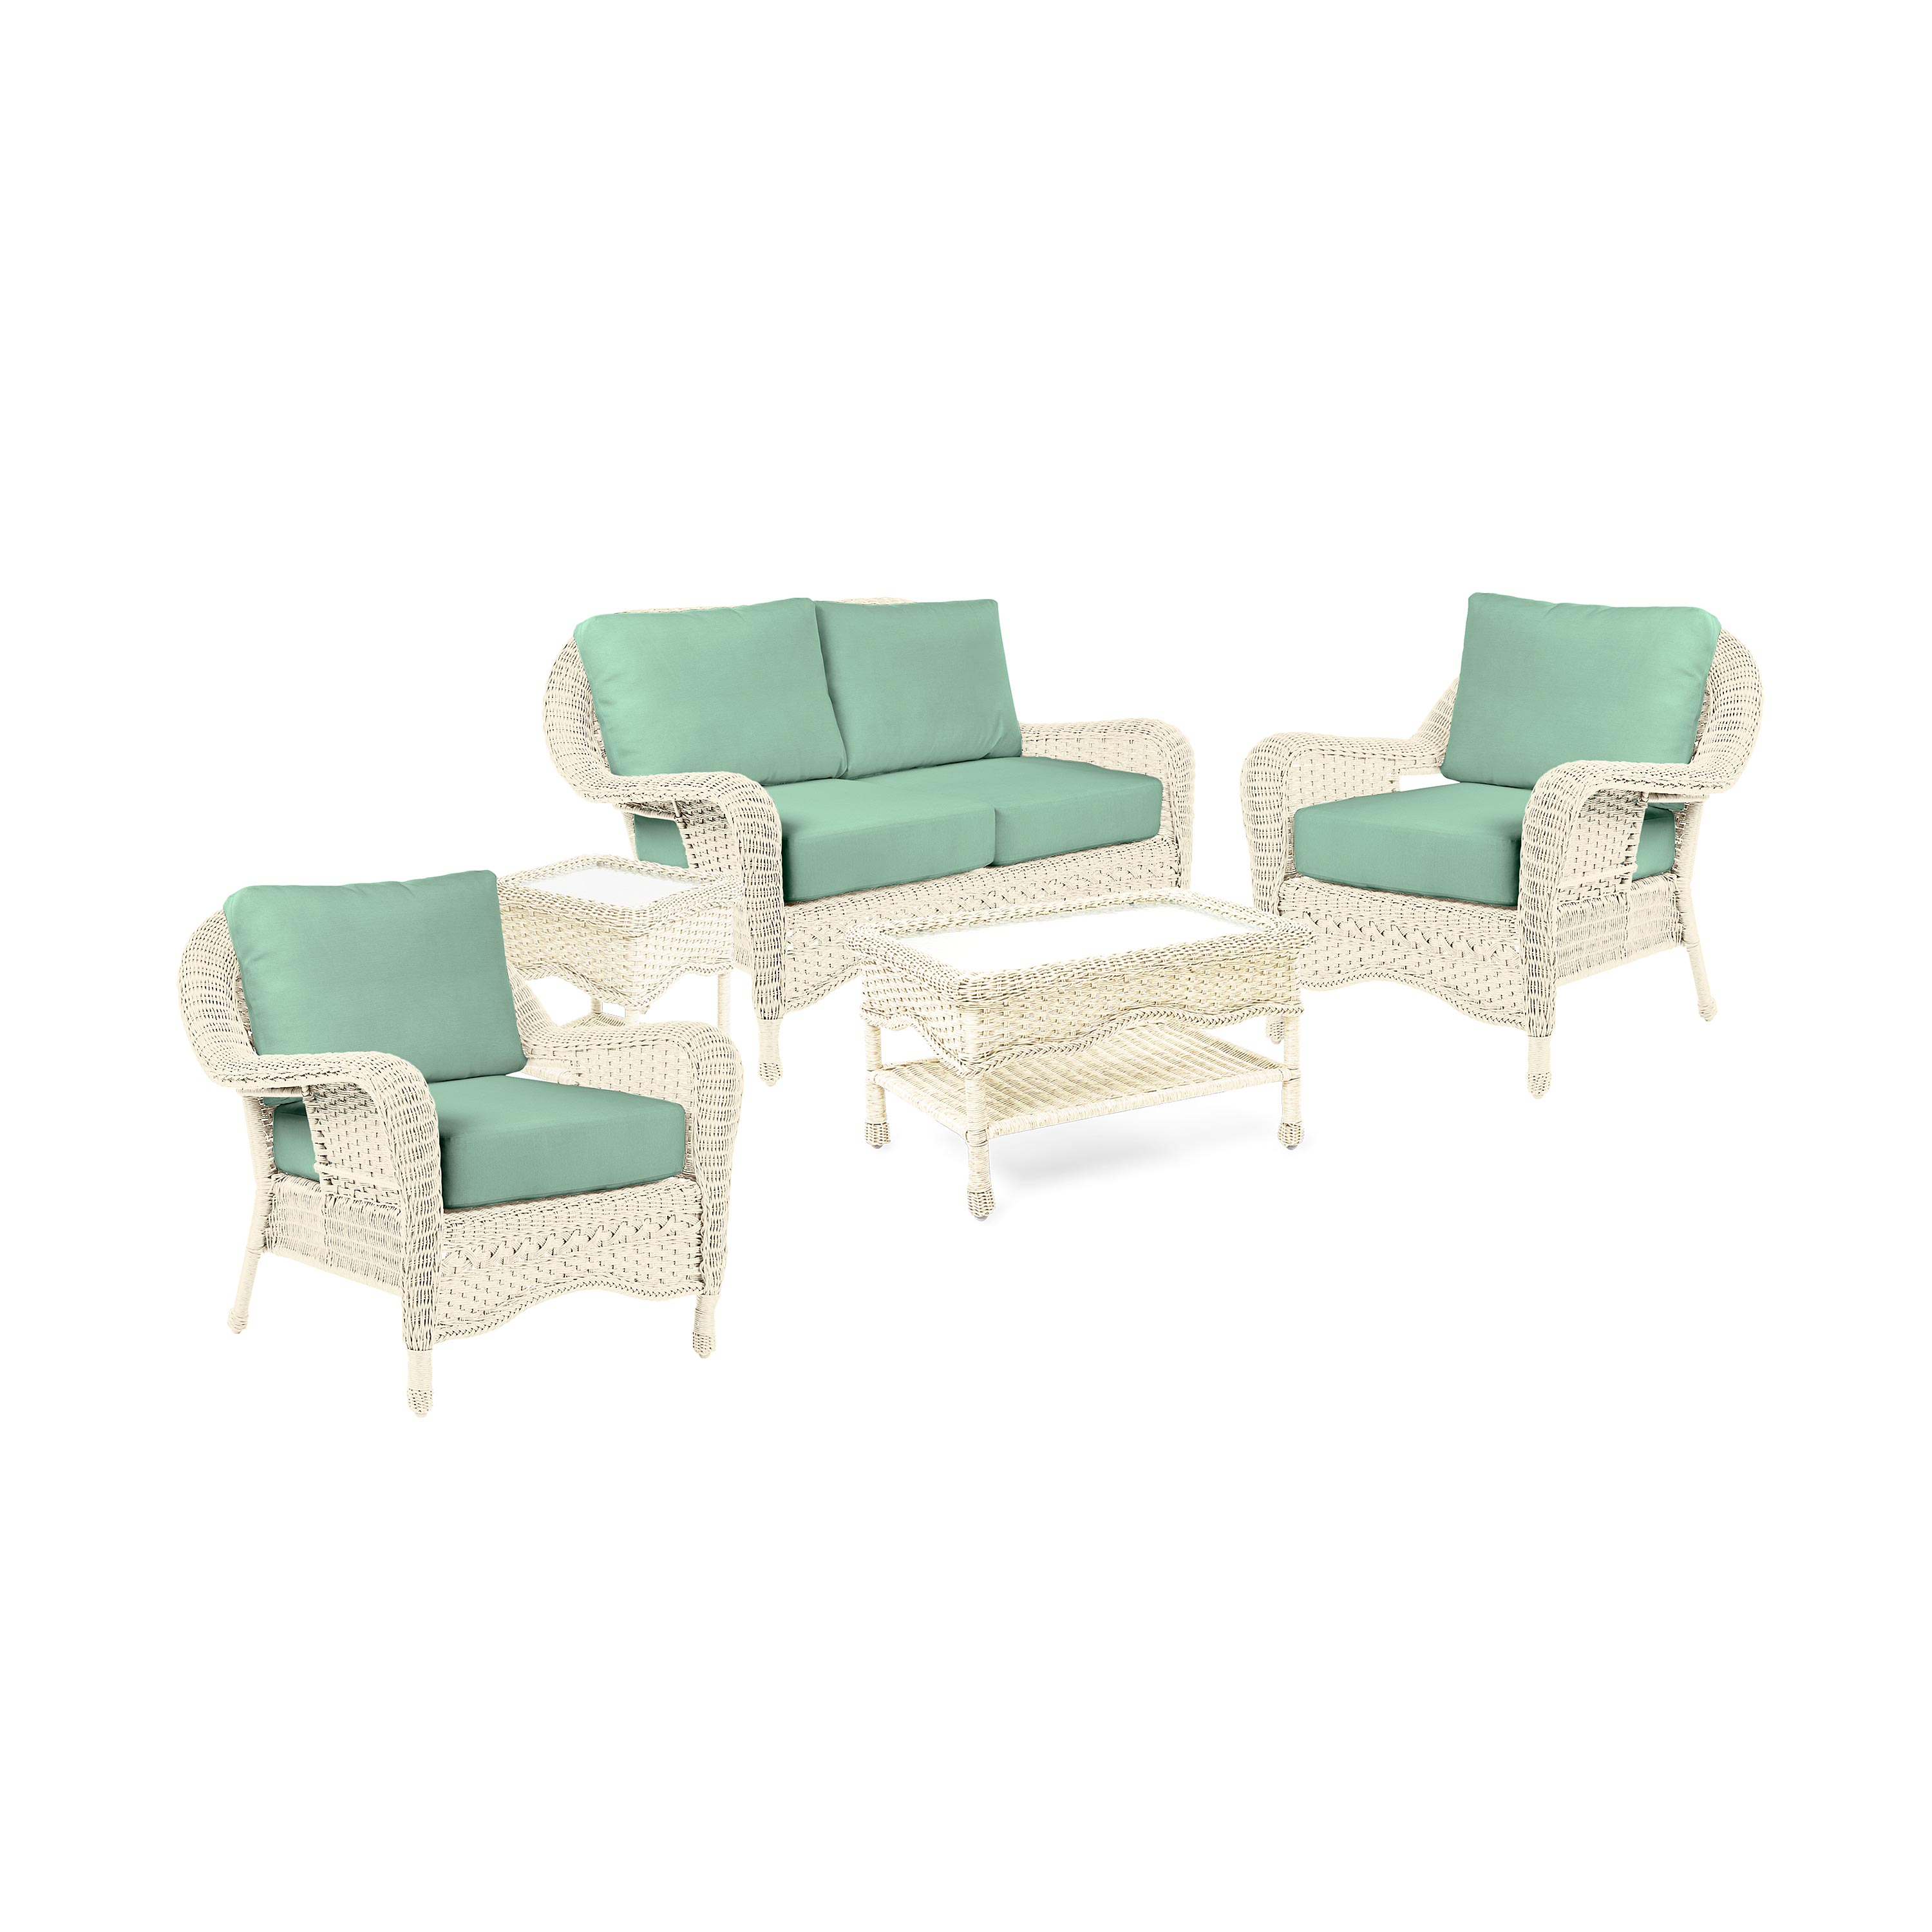 Prospect Hill Outdoor Wicker Deep Seating Love Seat Set with Cushions swatch image